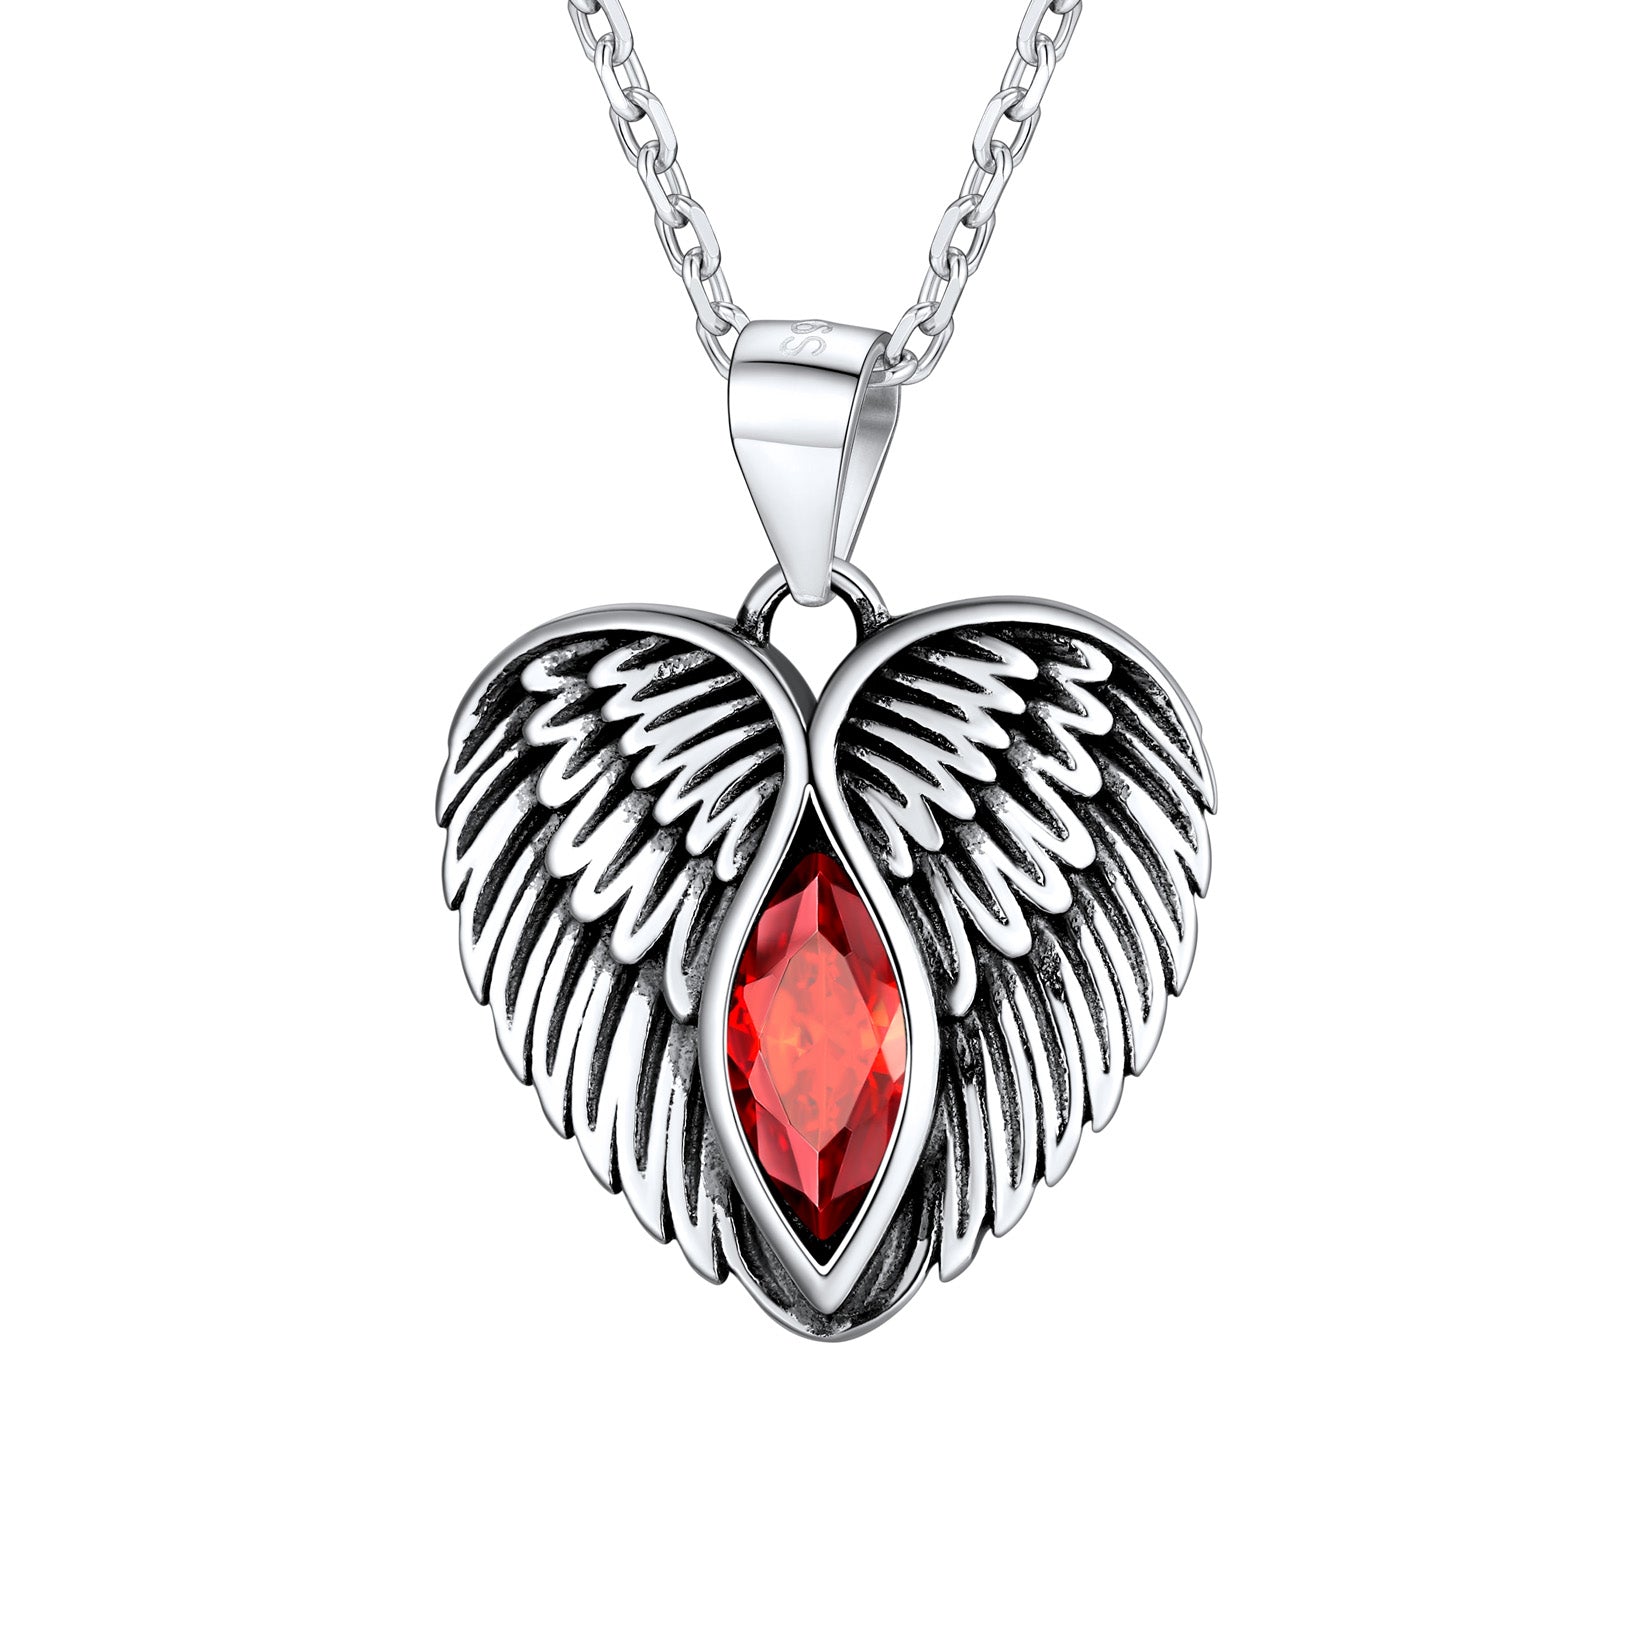 925 Sterling Silver Angel Wings Heart Pendant Chain Necklace 18